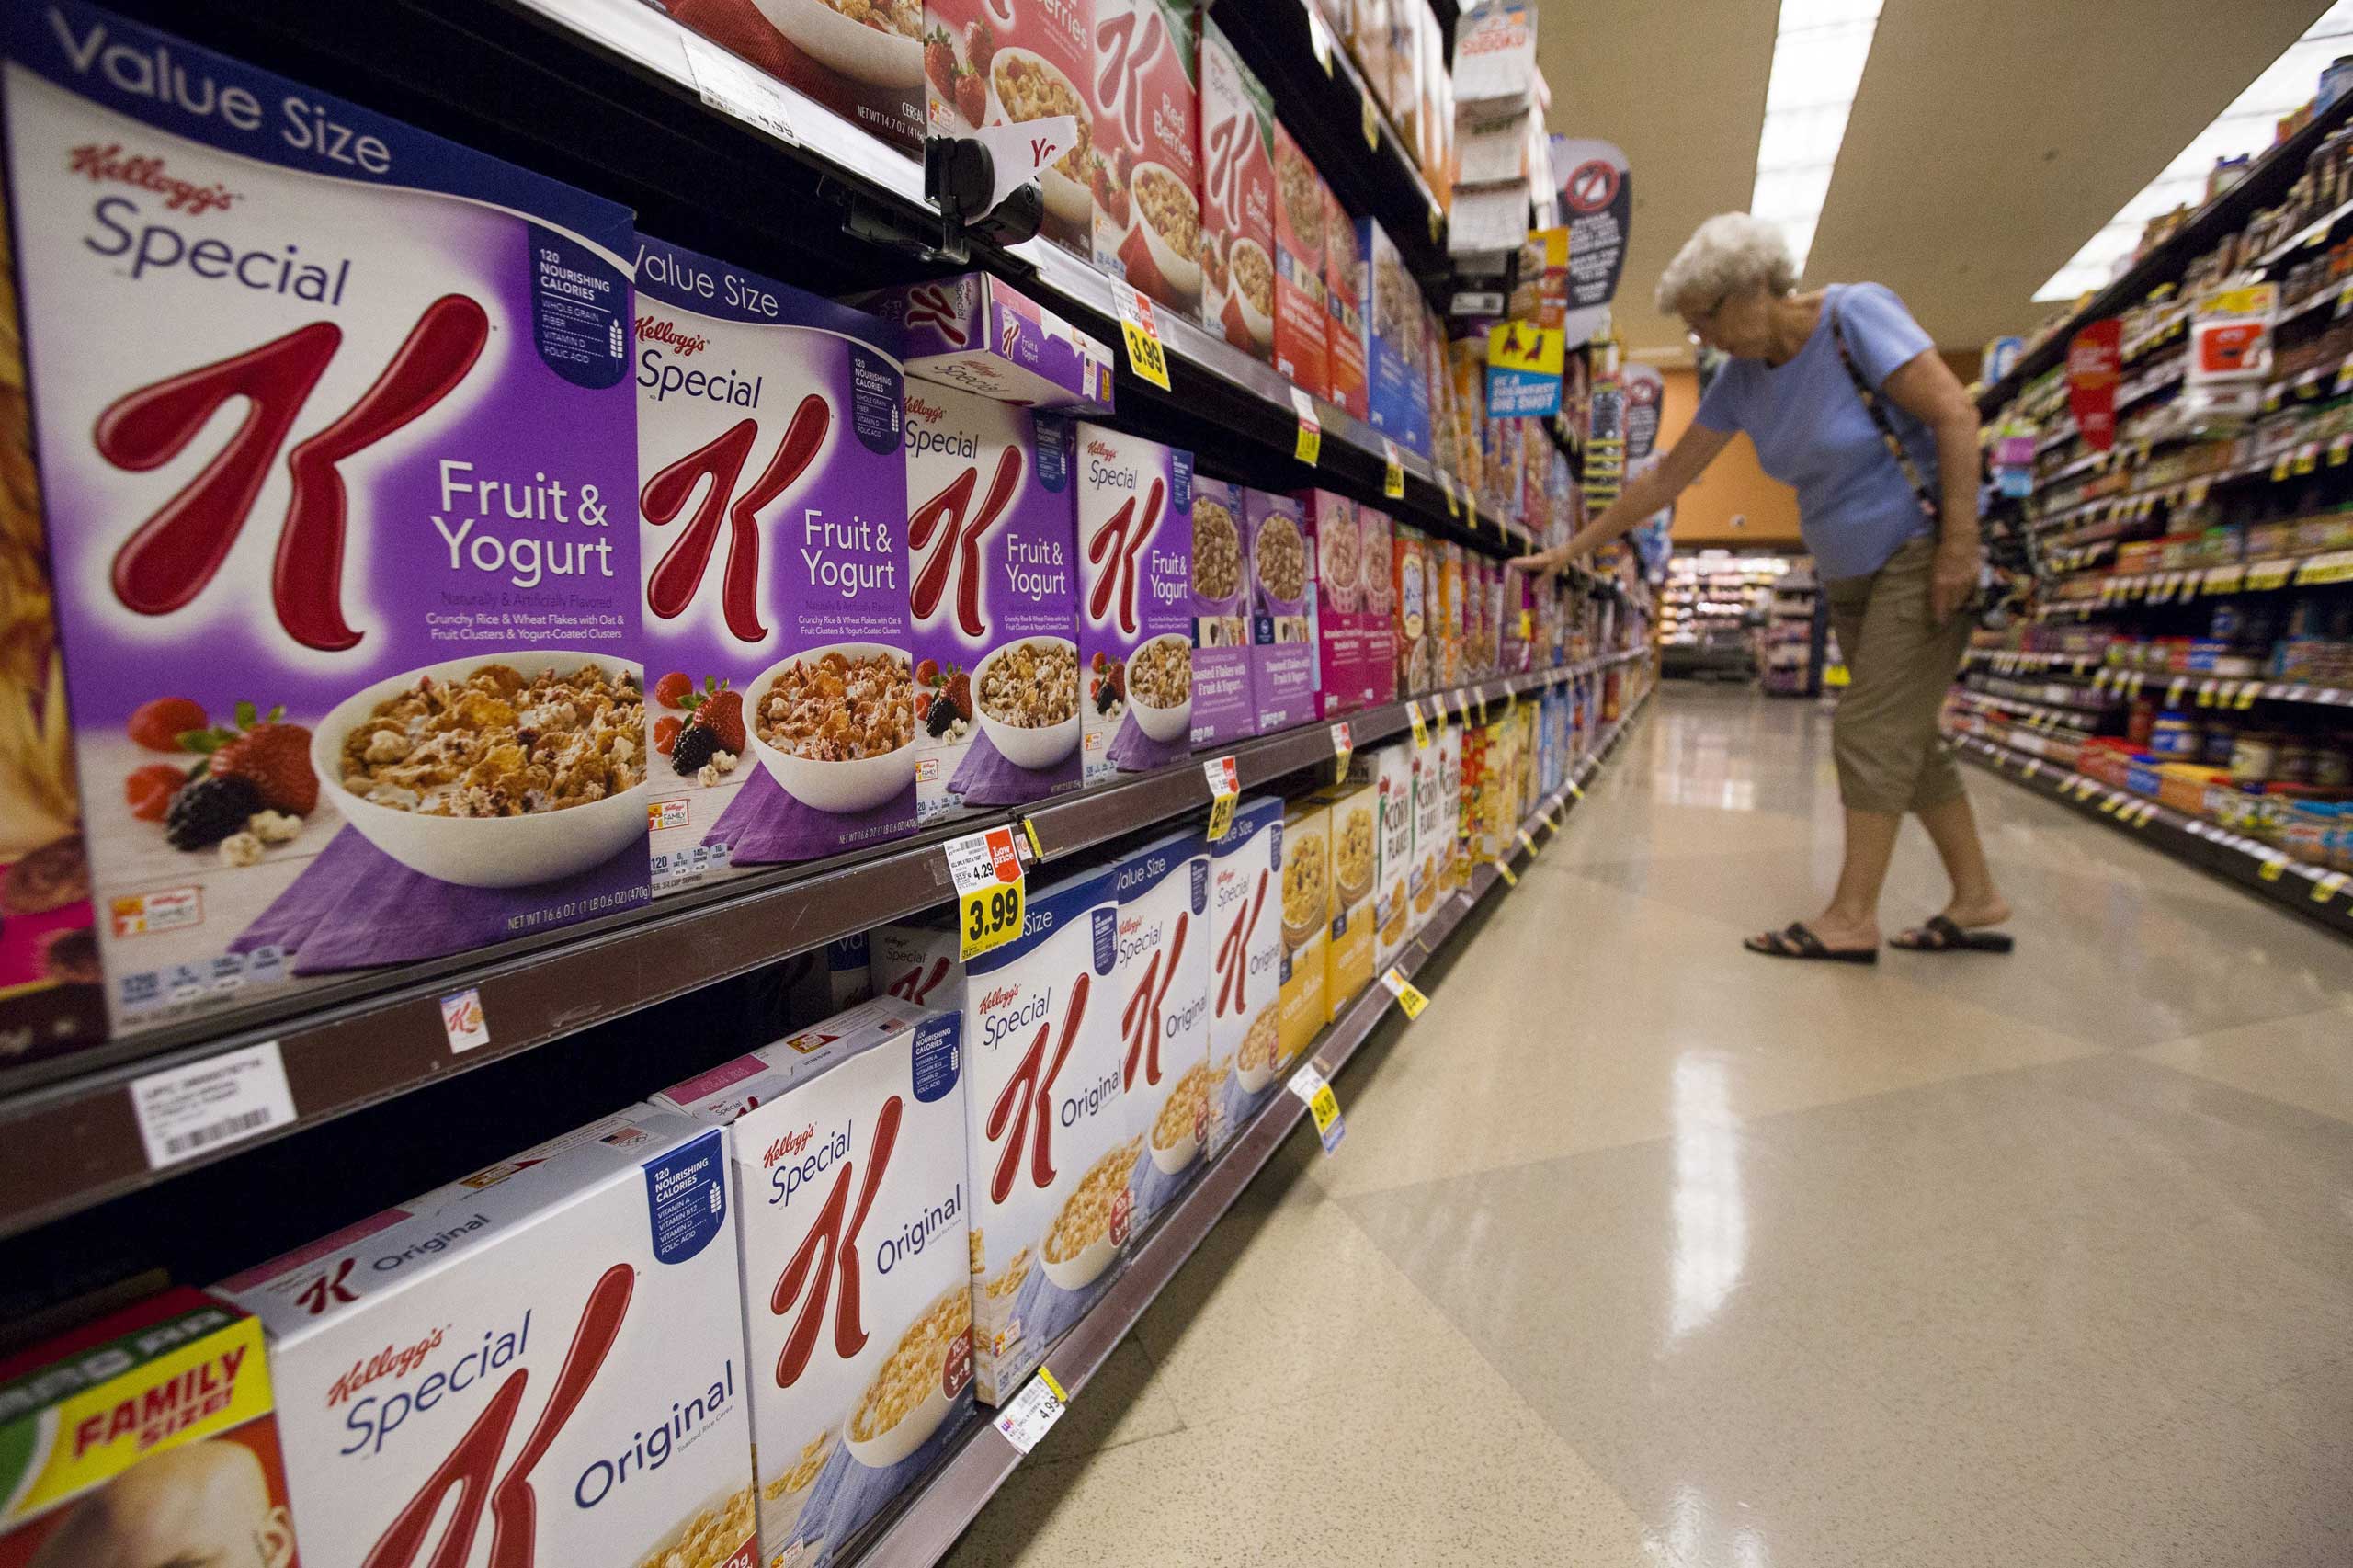 Kellogg's cereals are pictured at a grocery store in Pasadena, Calif. on Aug. 3, 2015. (Mario Anzuoni—Reuters)